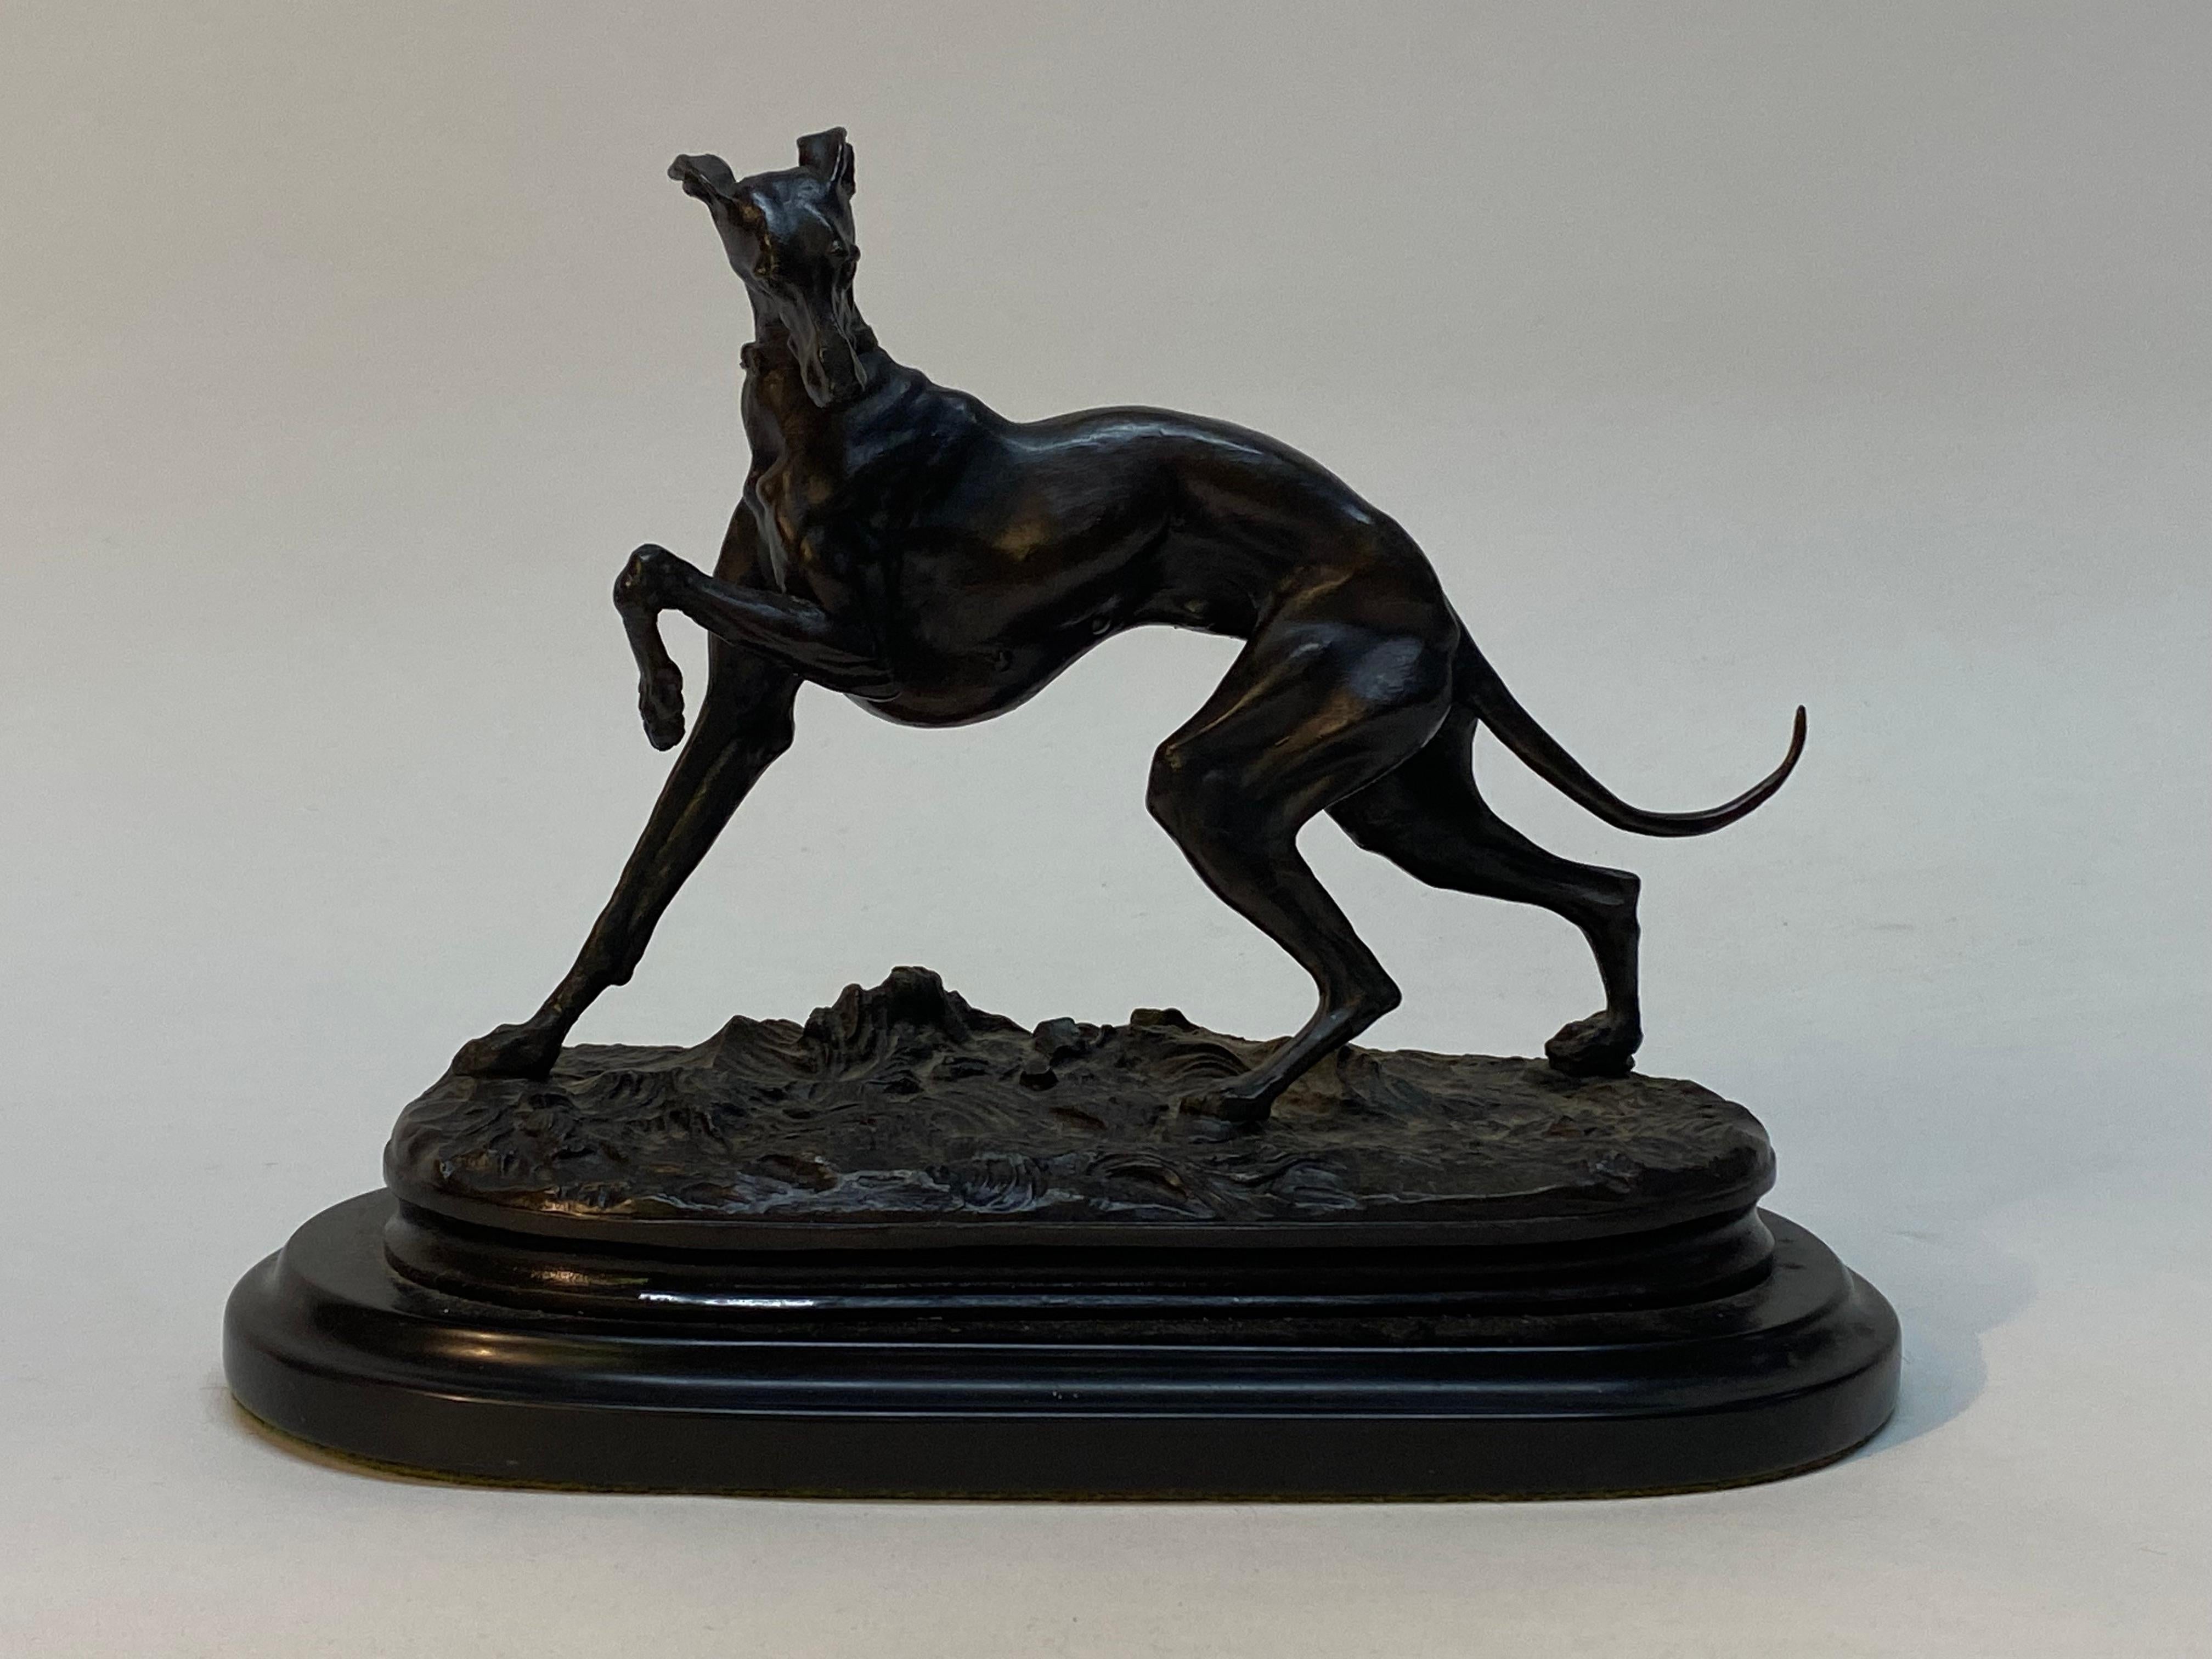 Cast bronze prancing greyhound by Pierre Jules Mene, (1810-1879). The highly detailed bronze rests on a back granite base. Impressed signature, PJ Mene. No foundry mark, but this was consistent with Men's work. Circa Late 19th Century. Fine